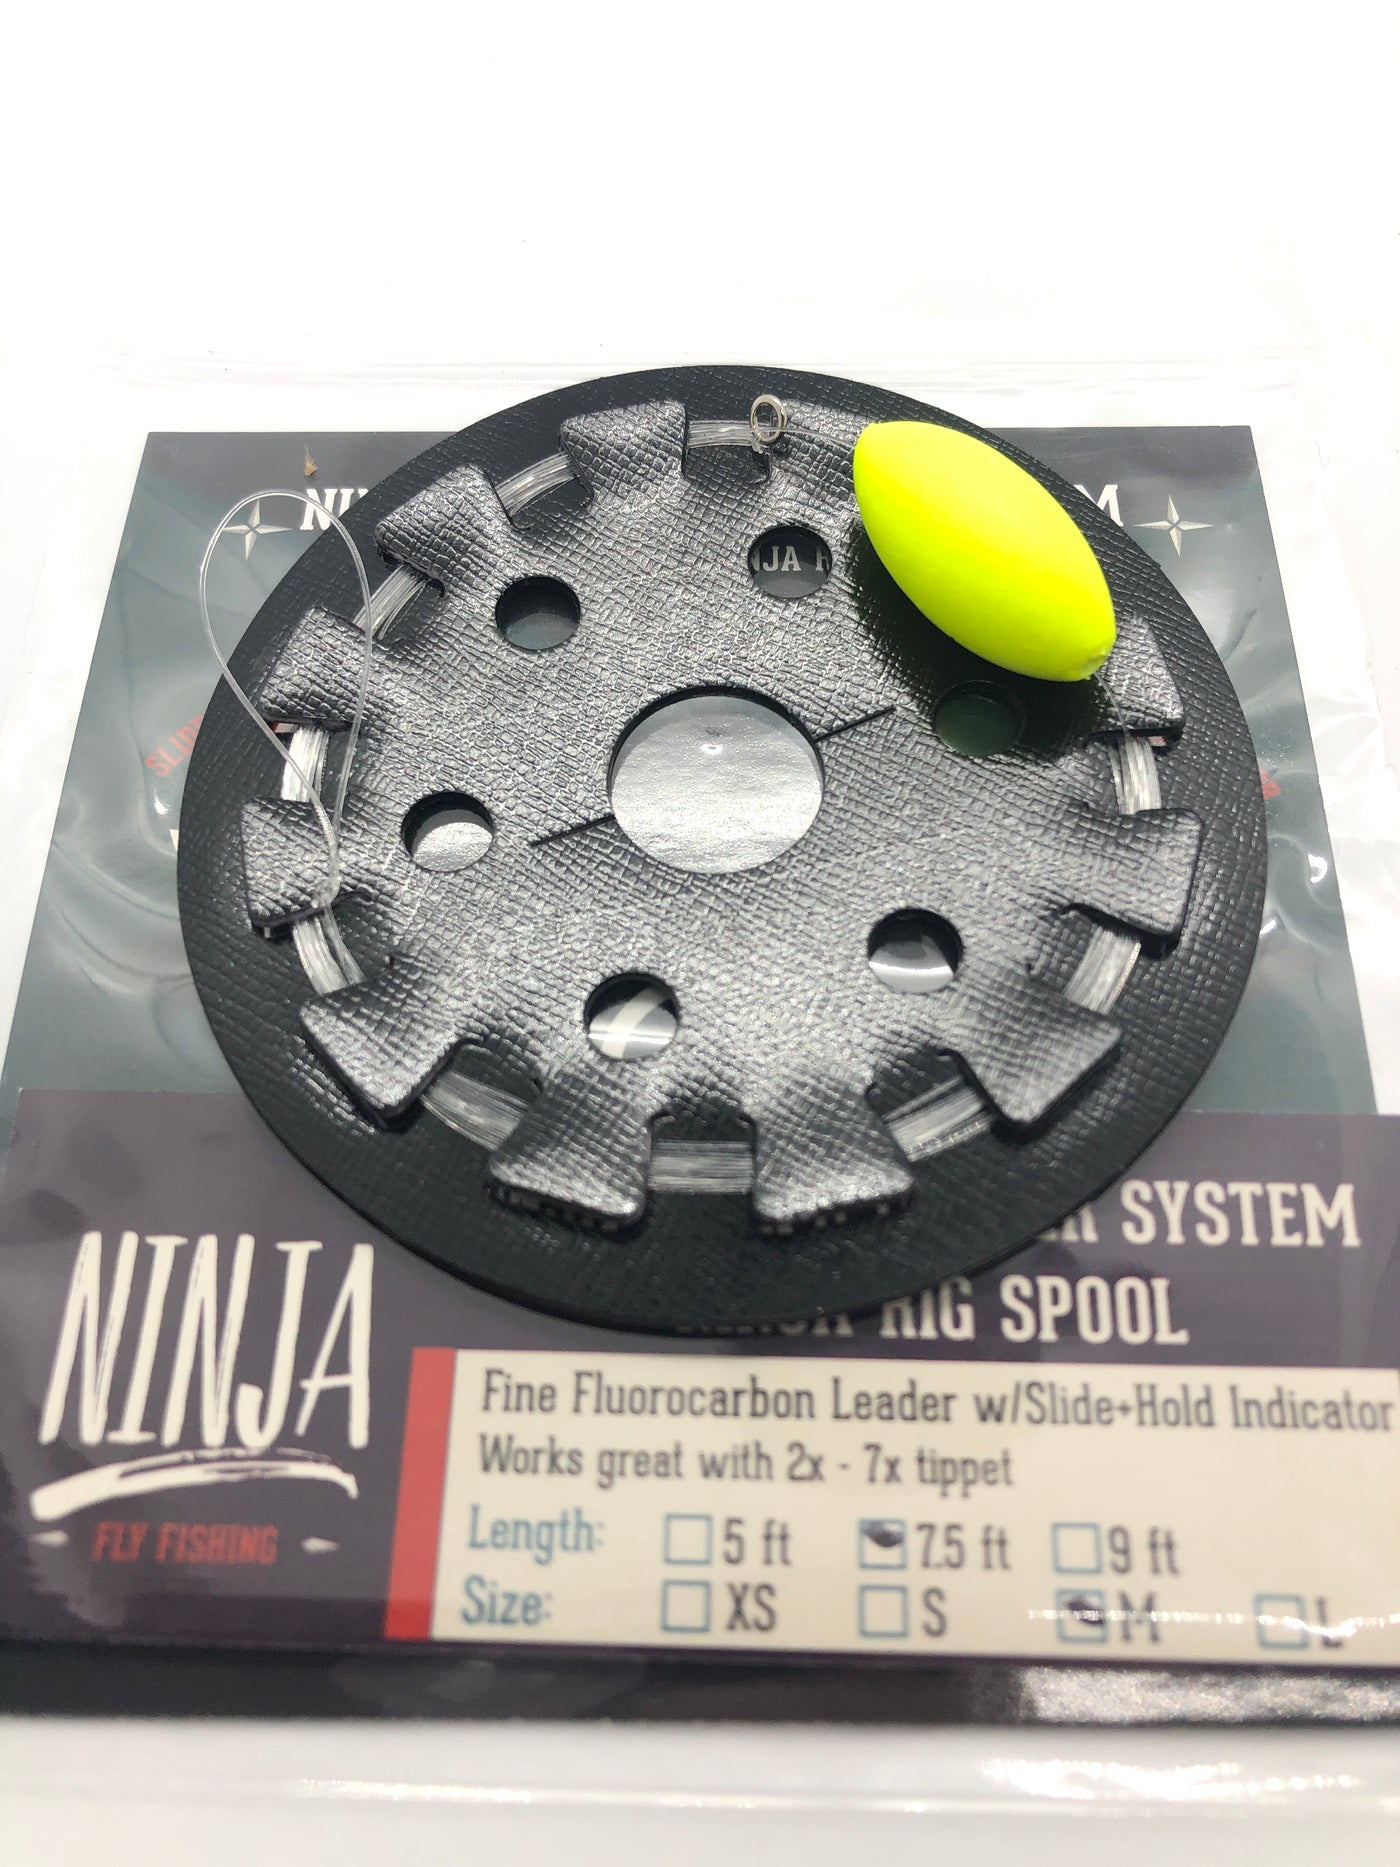 Ninja Nymph Leader System With Rigging Spool – Cutthroat Anglers